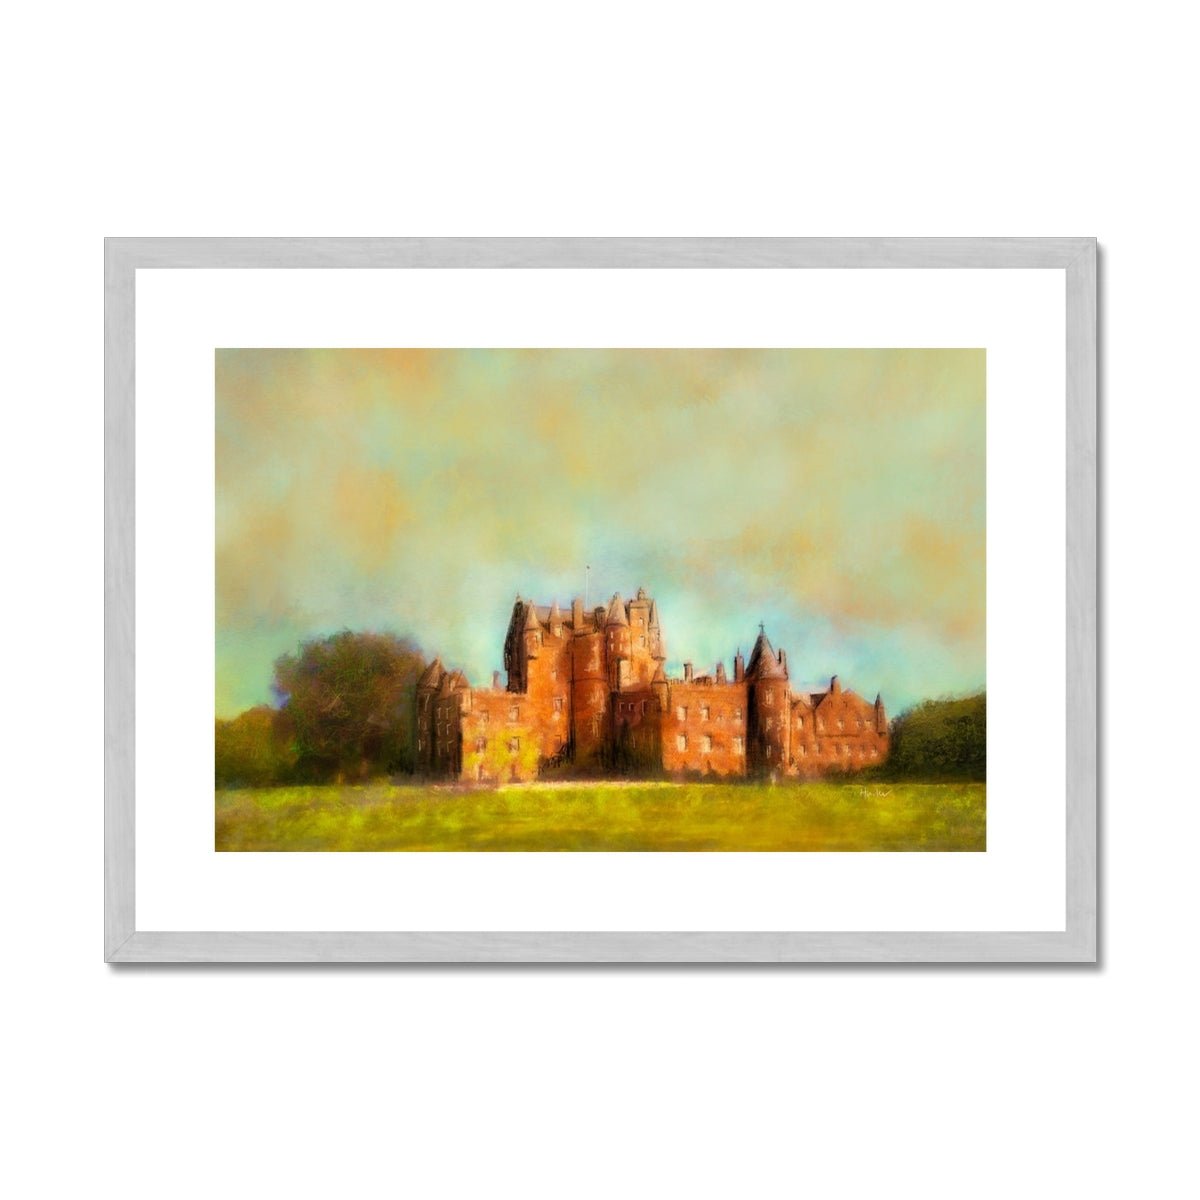 Glamis Castle Painting | Antique Framed & Mounted Prints From Scotland-Antique Framed & Mounted Prints-Historic & Iconic Scotland Art Gallery-A2 Landscape-Silver Frame-Paintings, Prints, Homeware, Art Gifts From Scotland By Scottish Artist Kevin Hunter